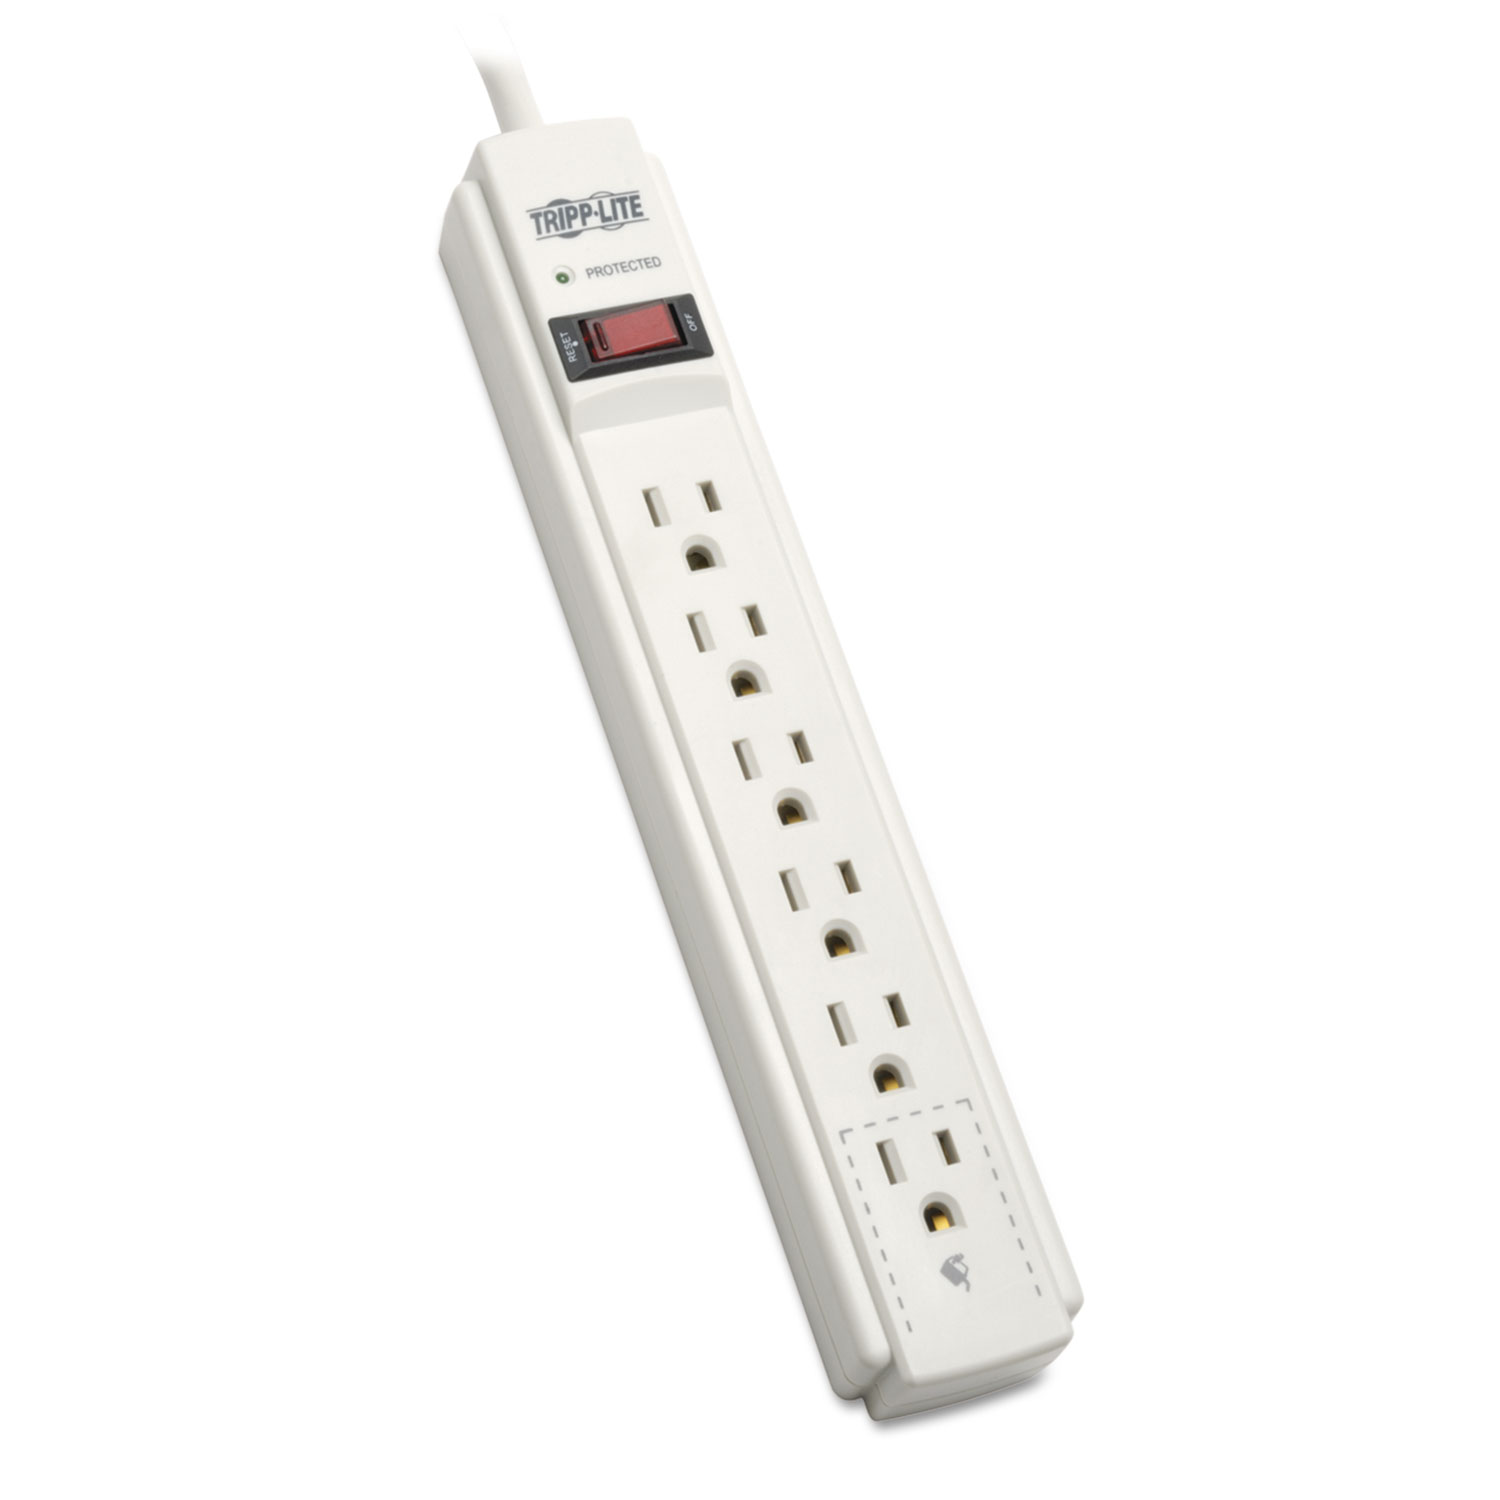  Tripp Lite TLP606 Protect It! Surge Protector, 6 Outlets, 6 ft. Cord, 790 Joules, Light Gray (TRPTLP606) 